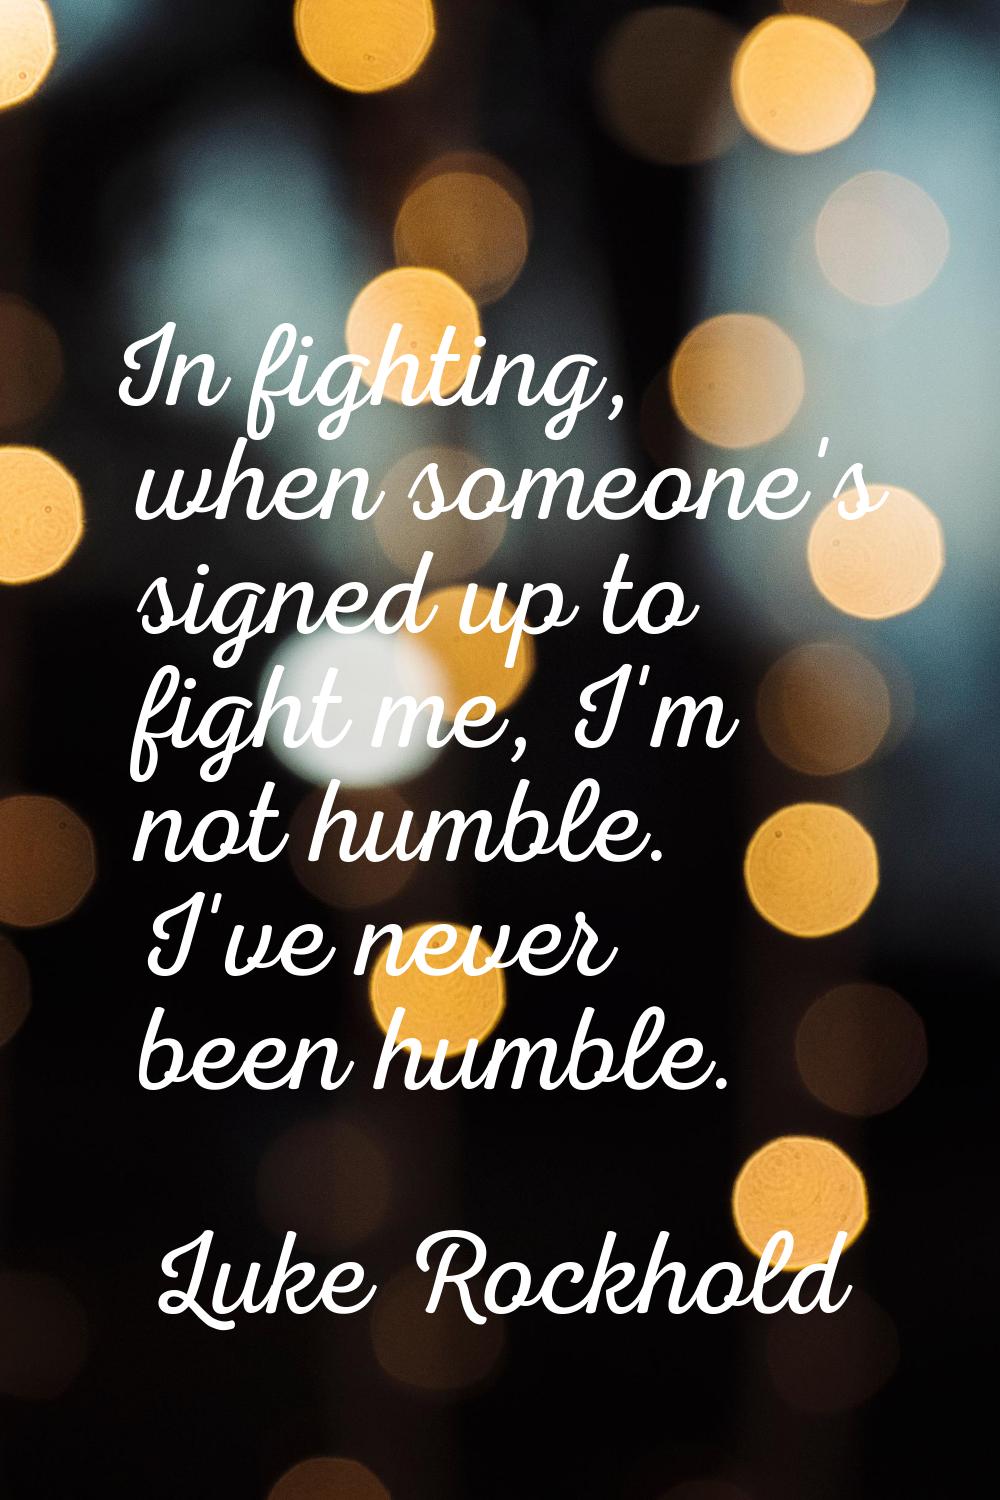 In fighting, when someone's signed up to fight me, I'm not humble. I've never been humble.